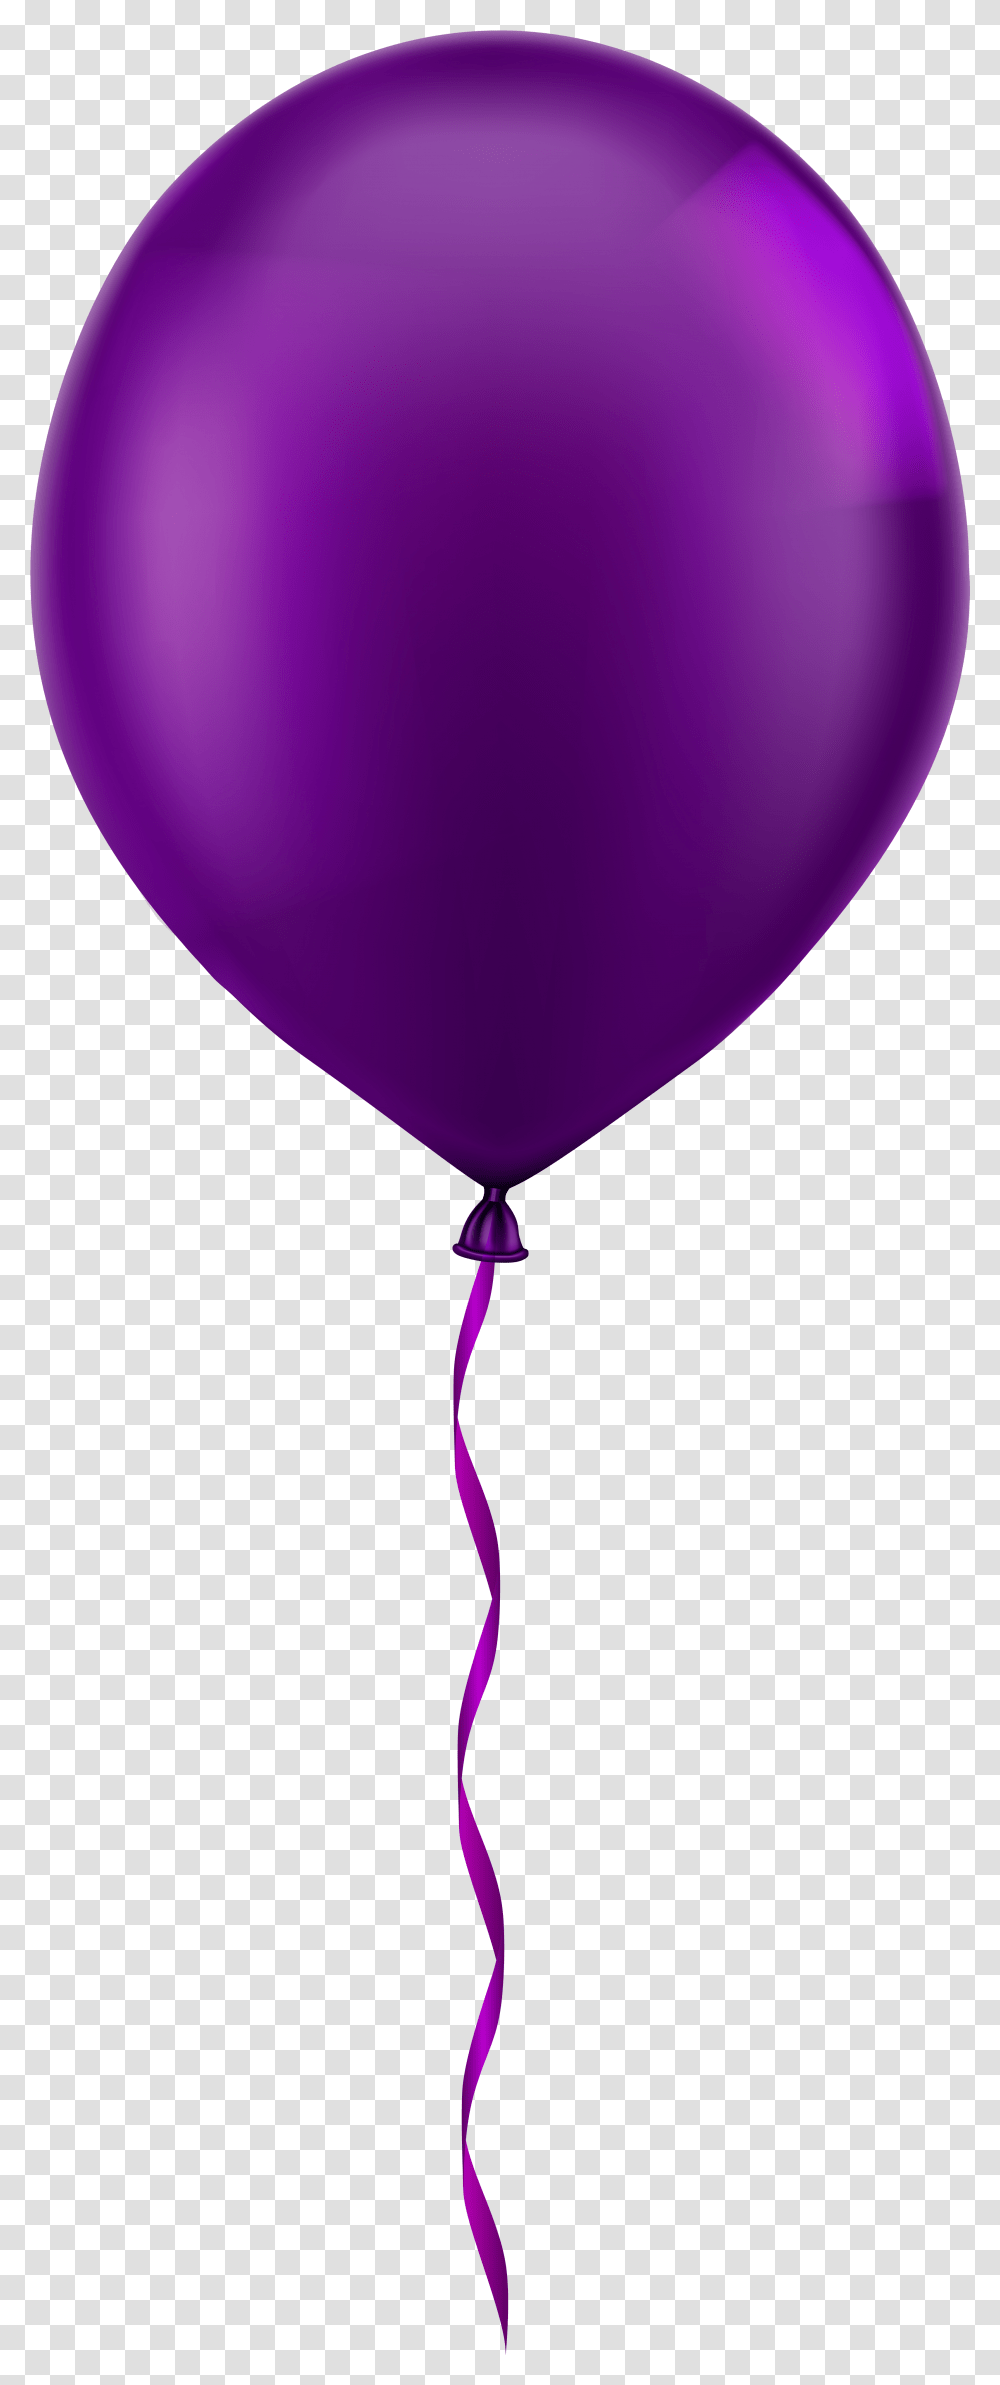 Balloons Clipart Purple Background Balloons Transparent Png